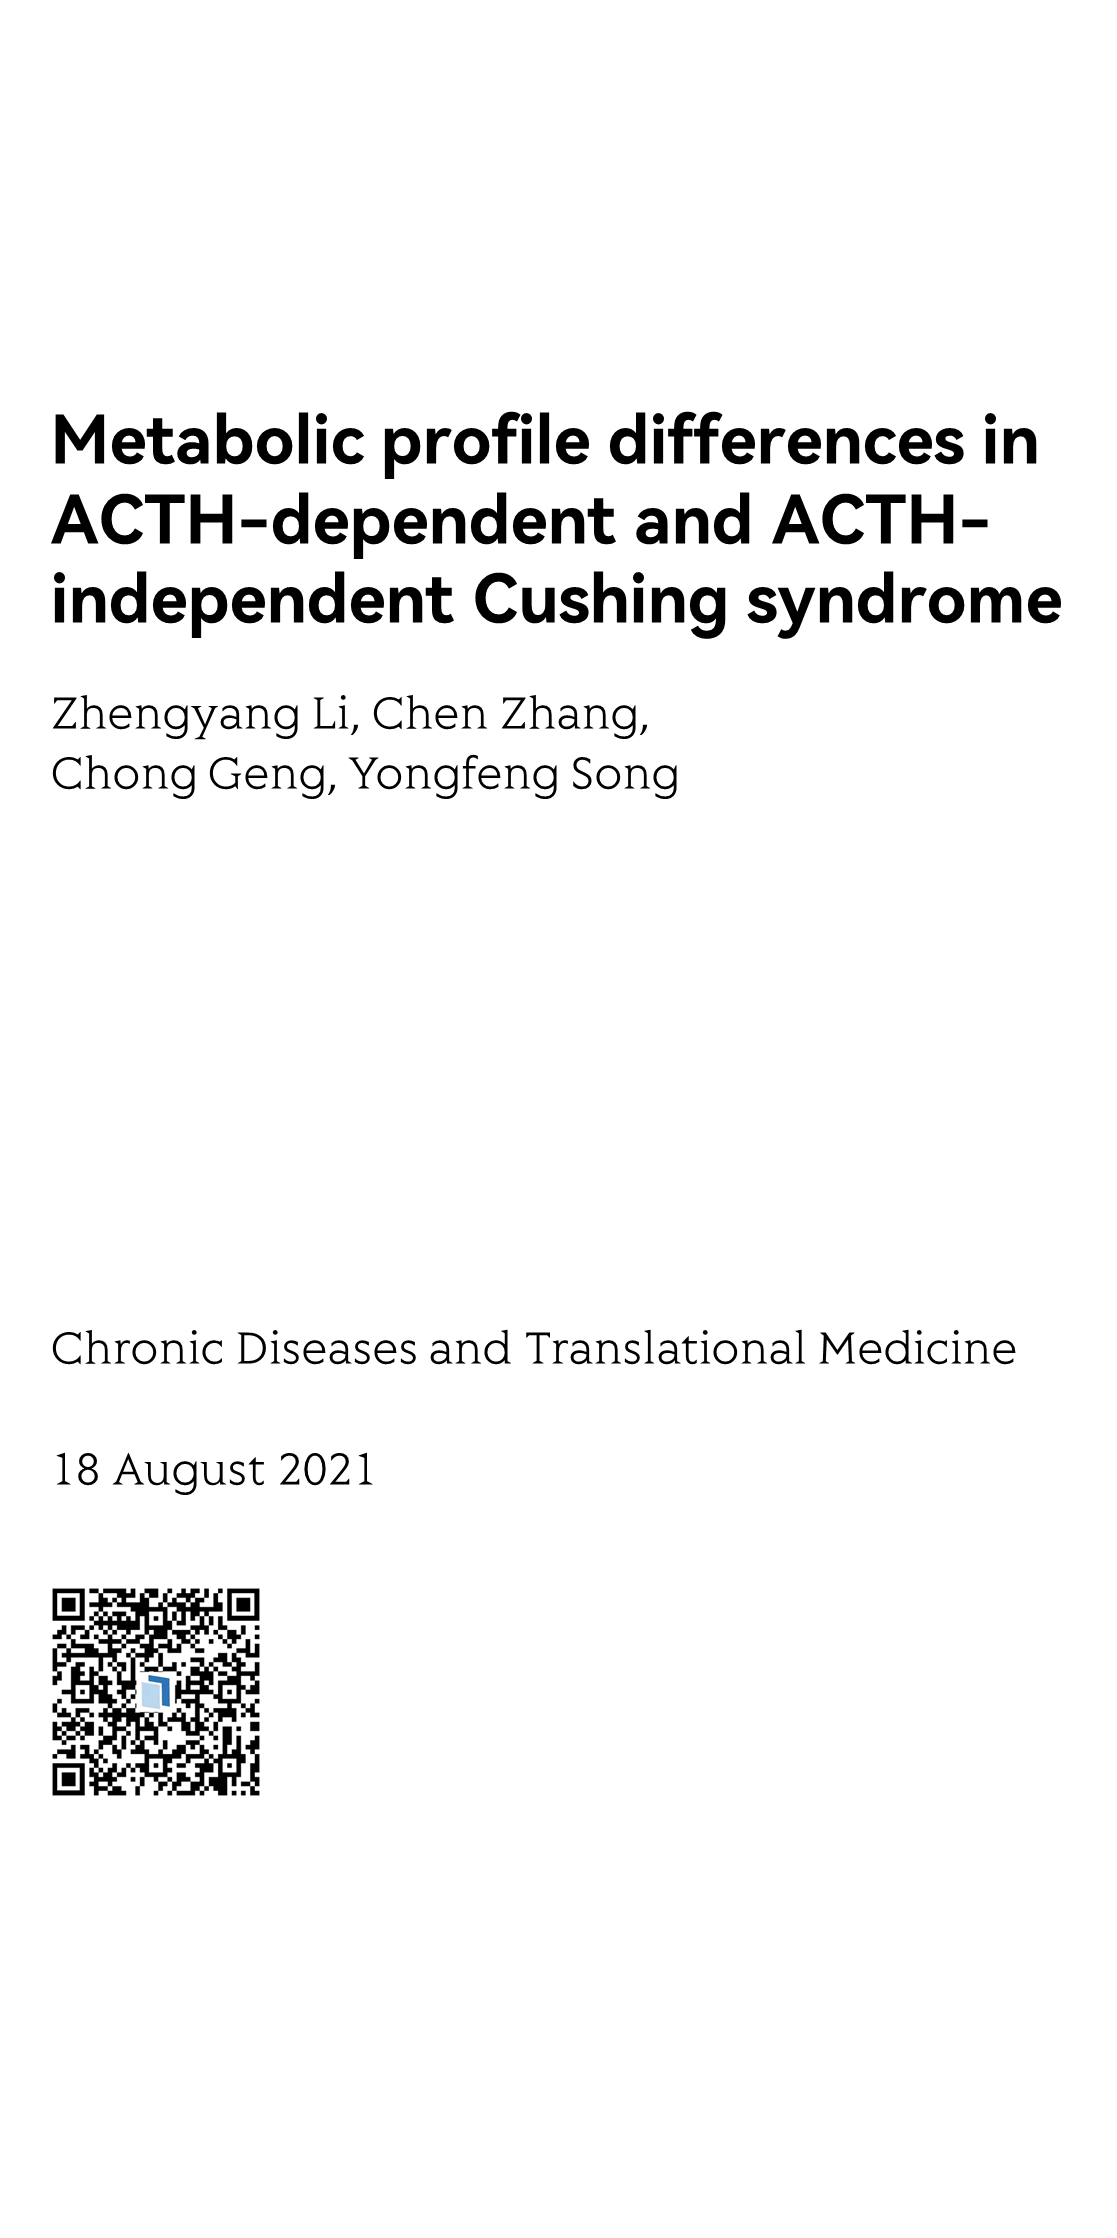 Metabolic profile differences in ACTH-dependent and ACTH-independent Cushing syndrome_1